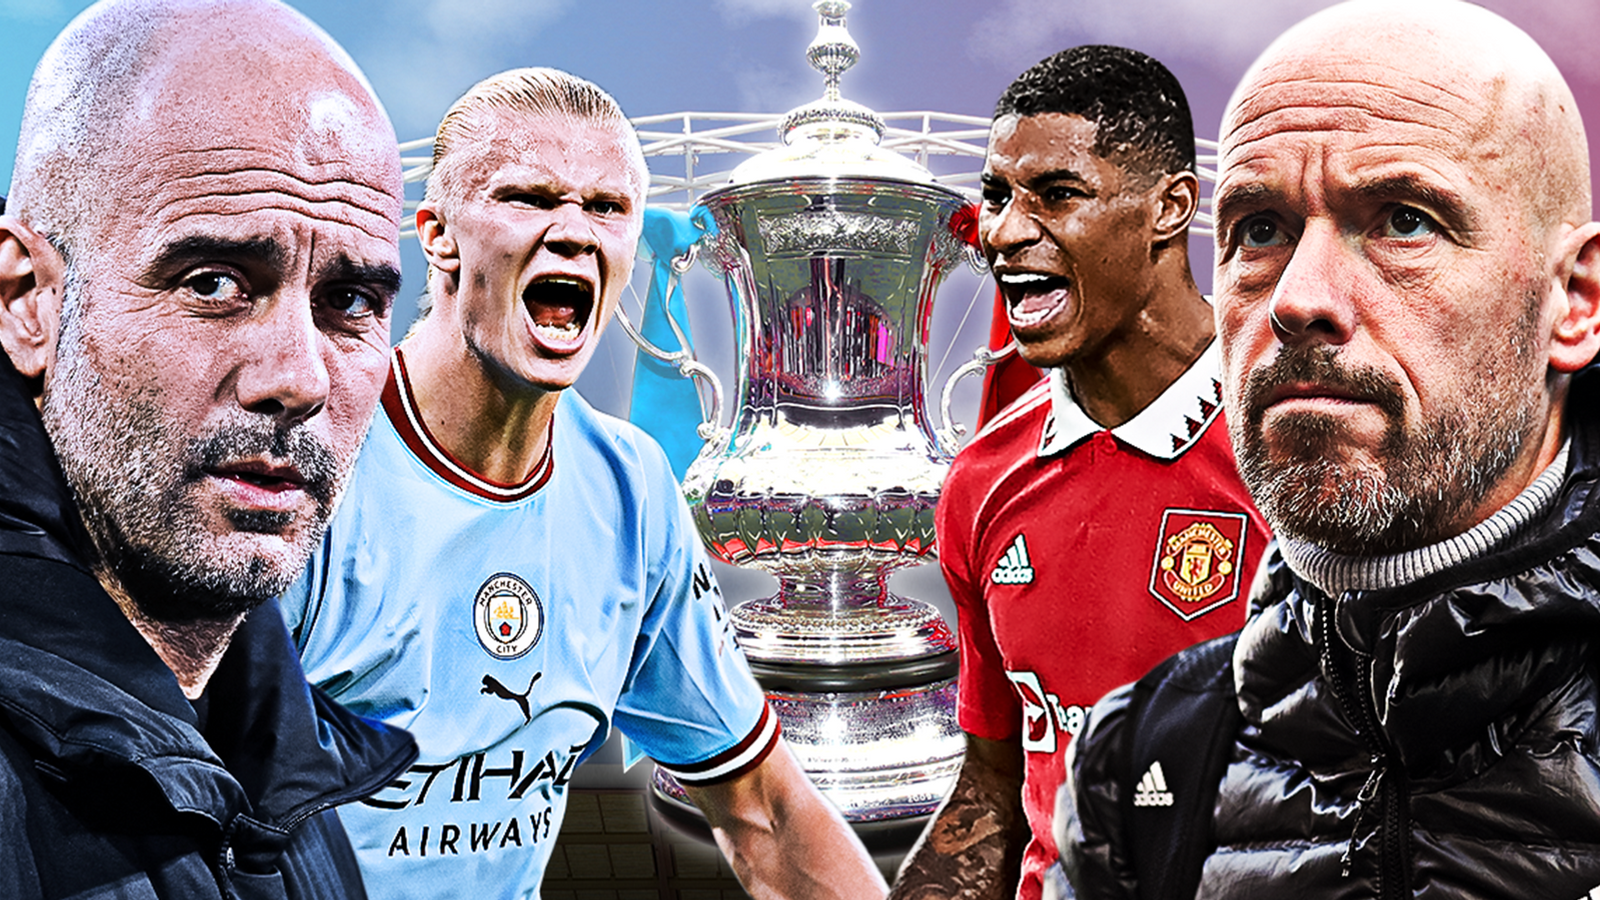 FA Cup final: Man Utd out to protect legacy of 1999 by ending champions City's treble dream